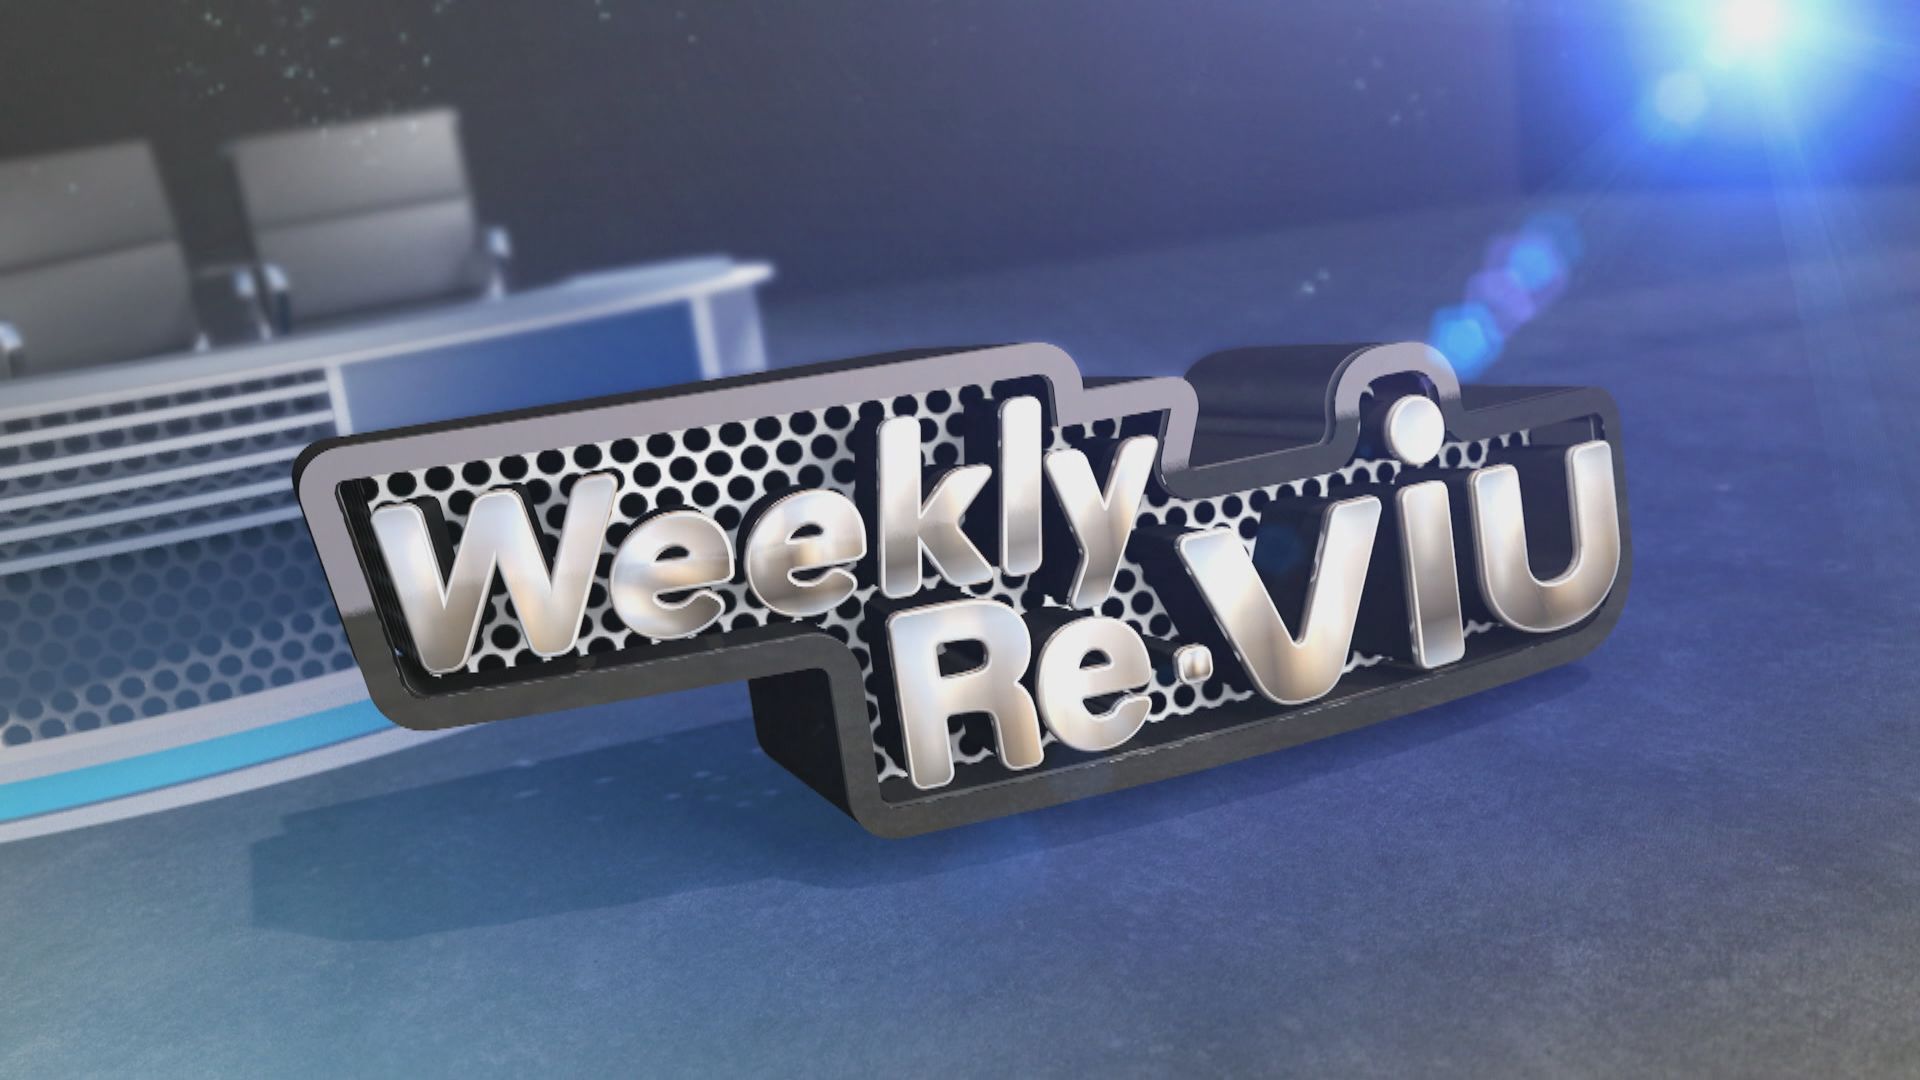 Weekly ReViu | Part Two - Story Roundup (6.8.2022)